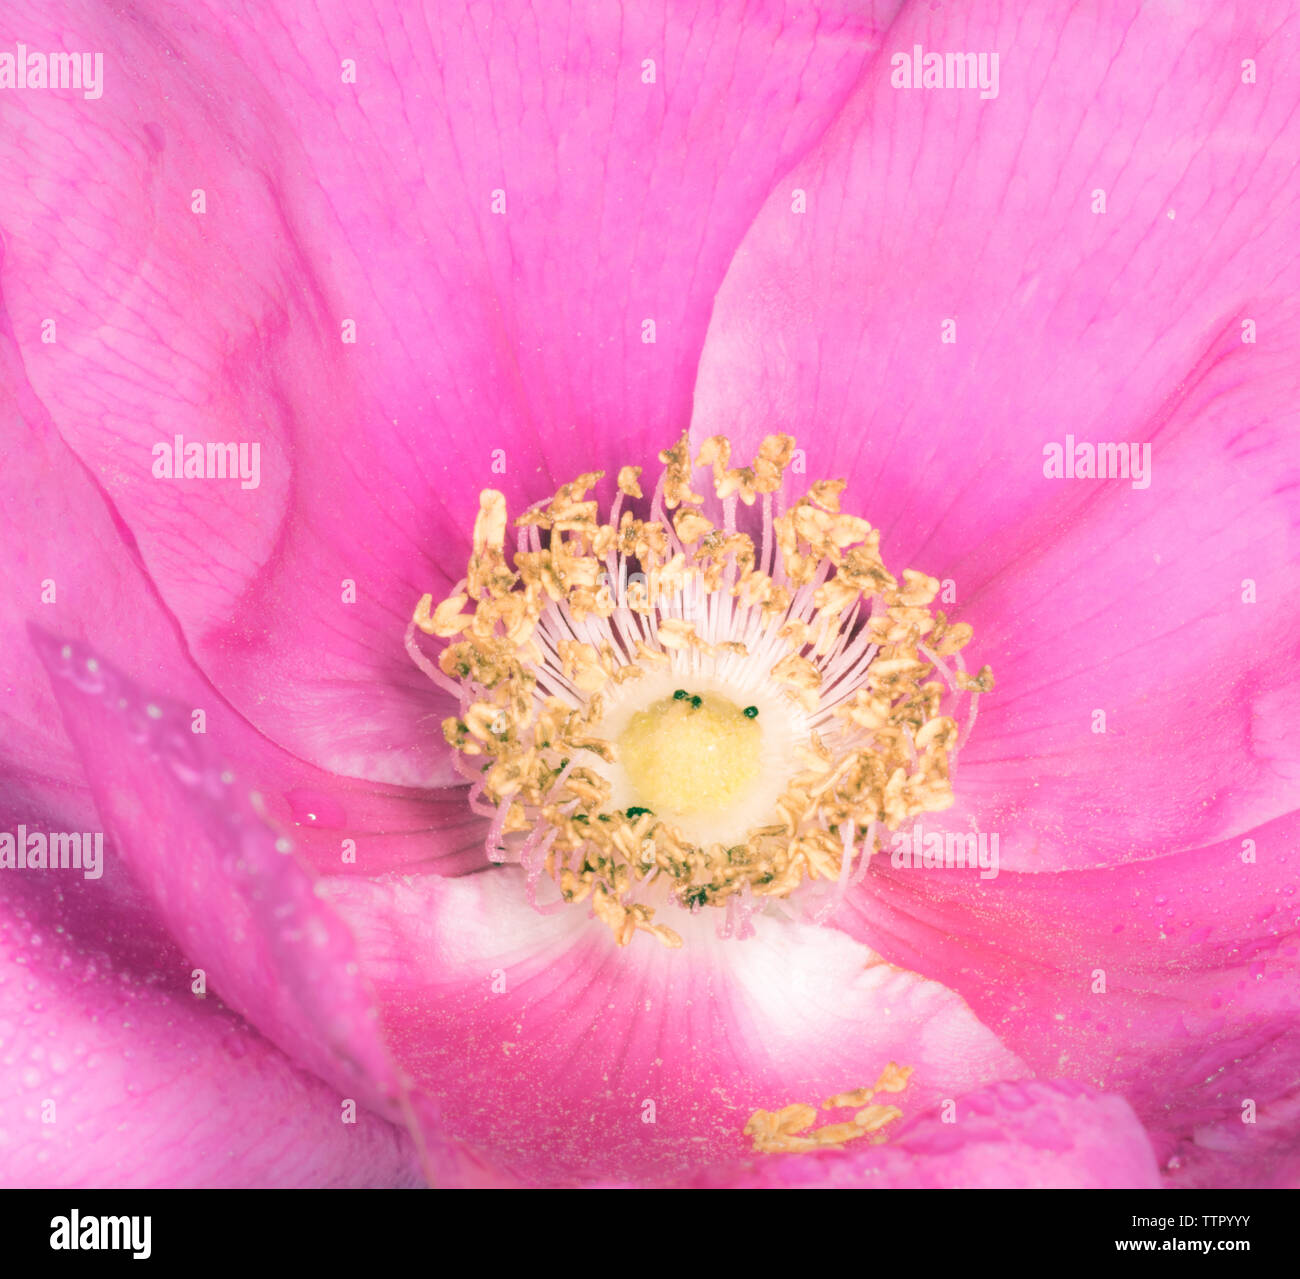 Japanese Anemone - cheerful, pink ruffled petals and centers of gleaming gold. Pink flower close up Stock Photo